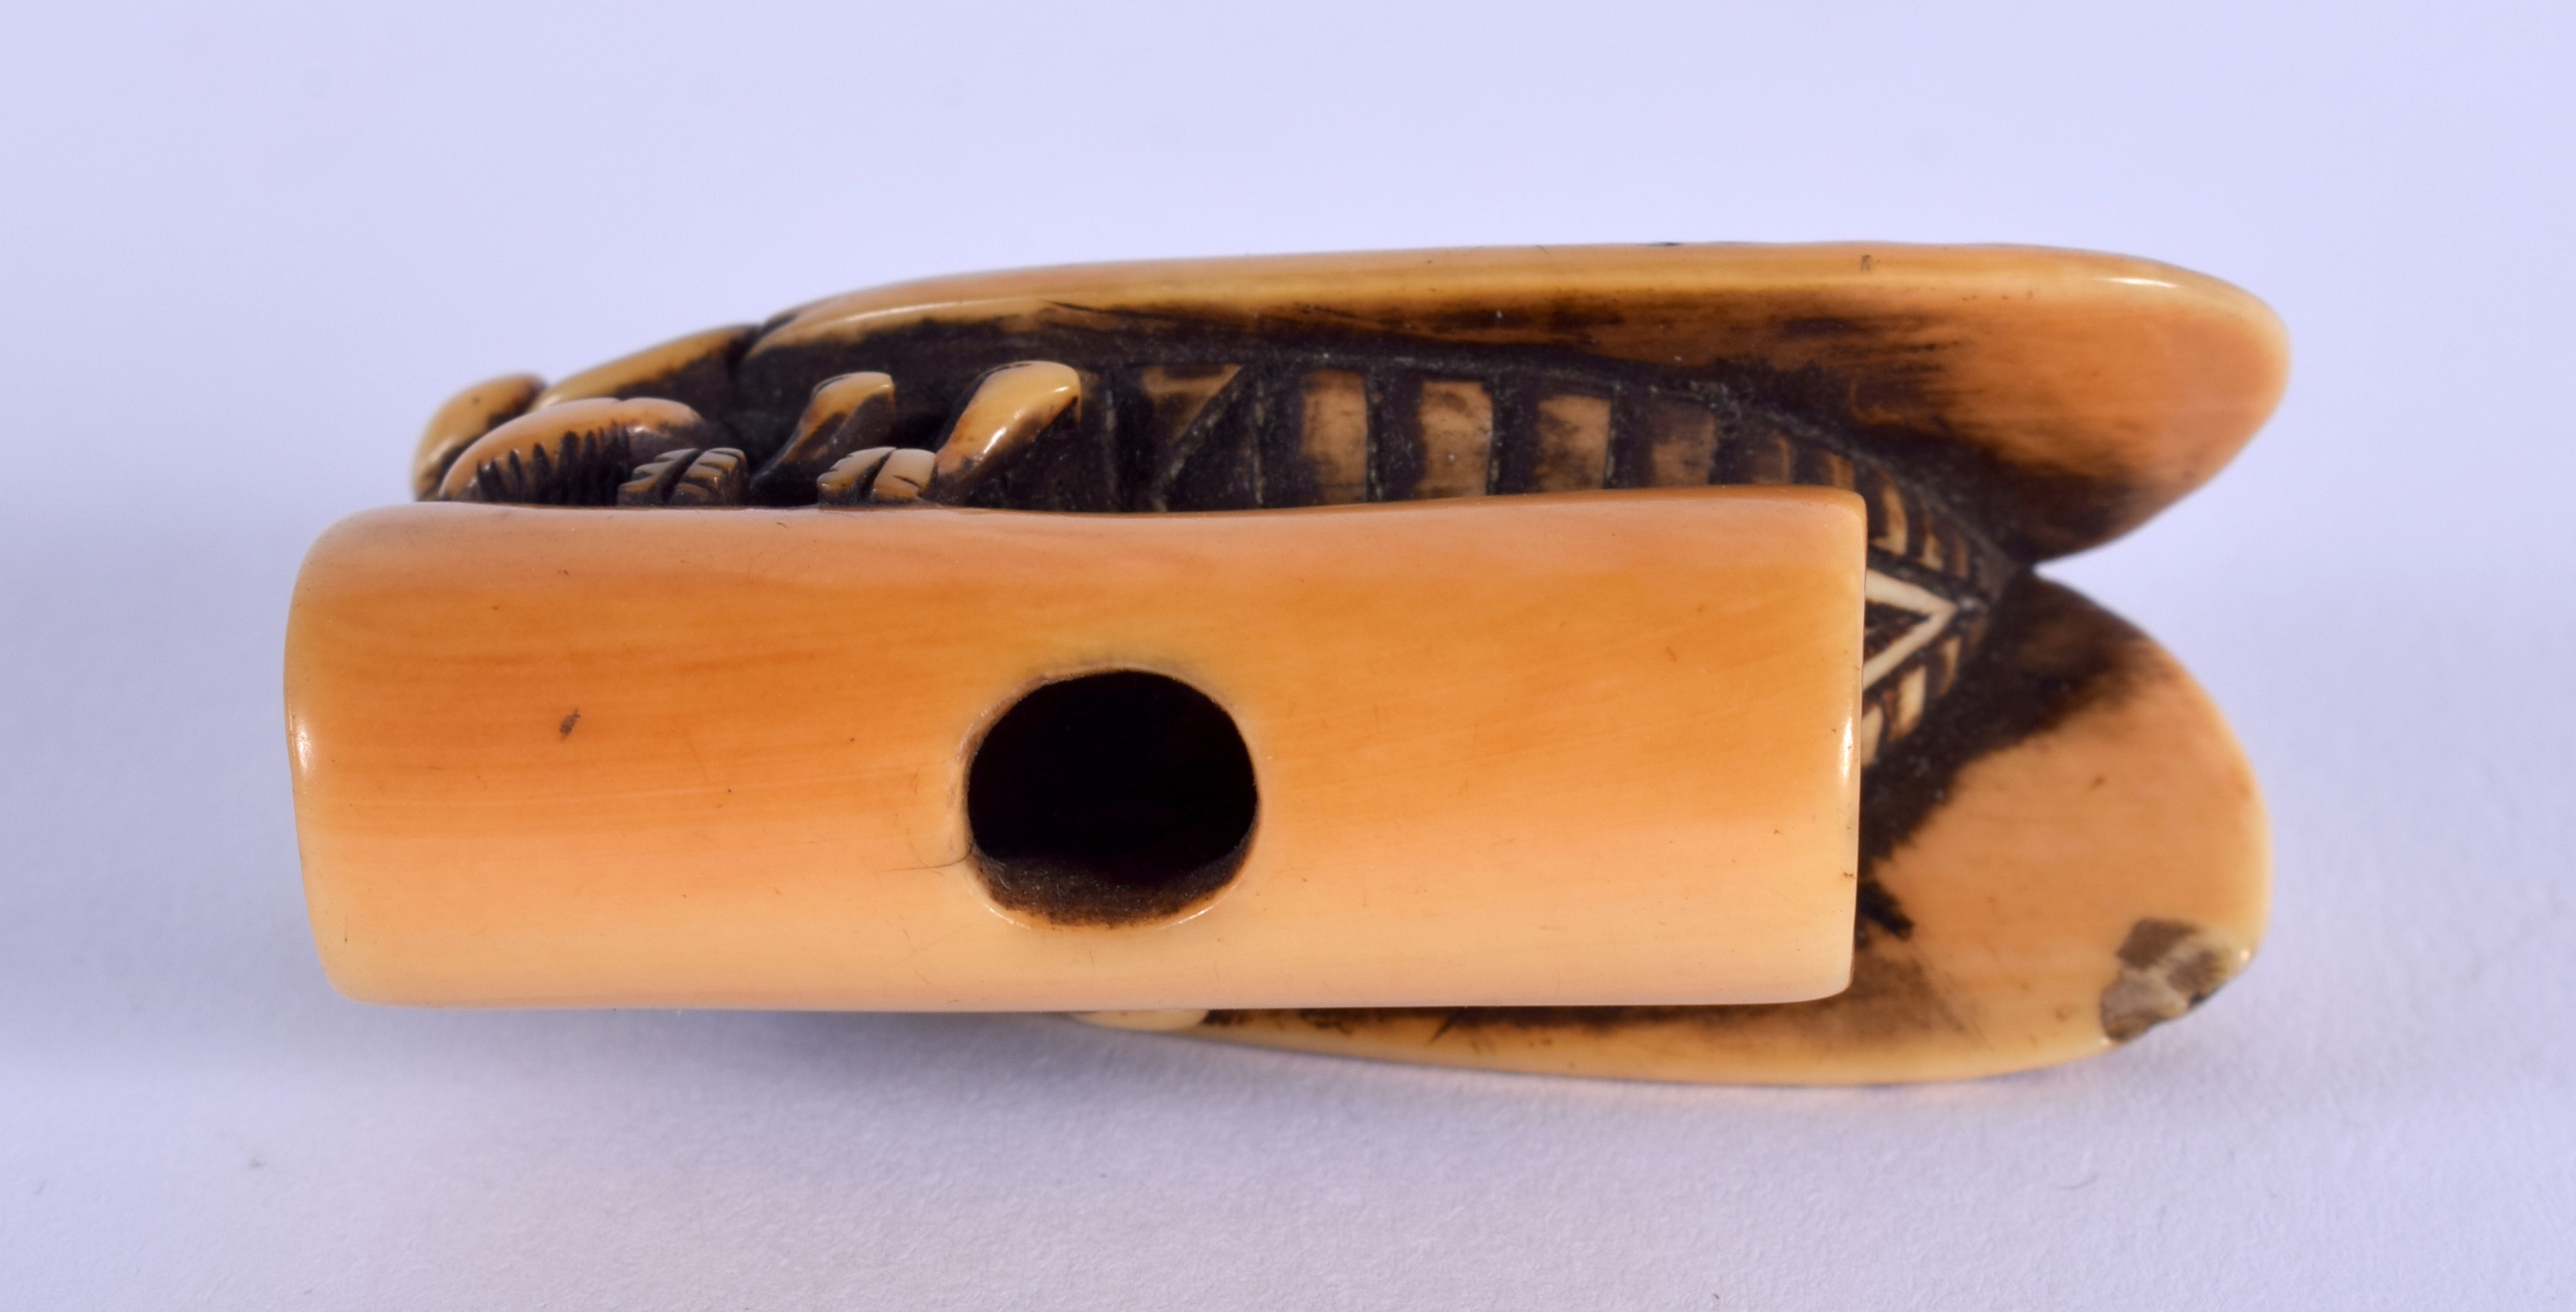 A LOVELY 18TH CENTURY JAPANESE MEIJI PERIOD CARVED IVORY NETSUKE modelled as a fly. 4.5 cm x 2.5 cm. - Image 3 of 3